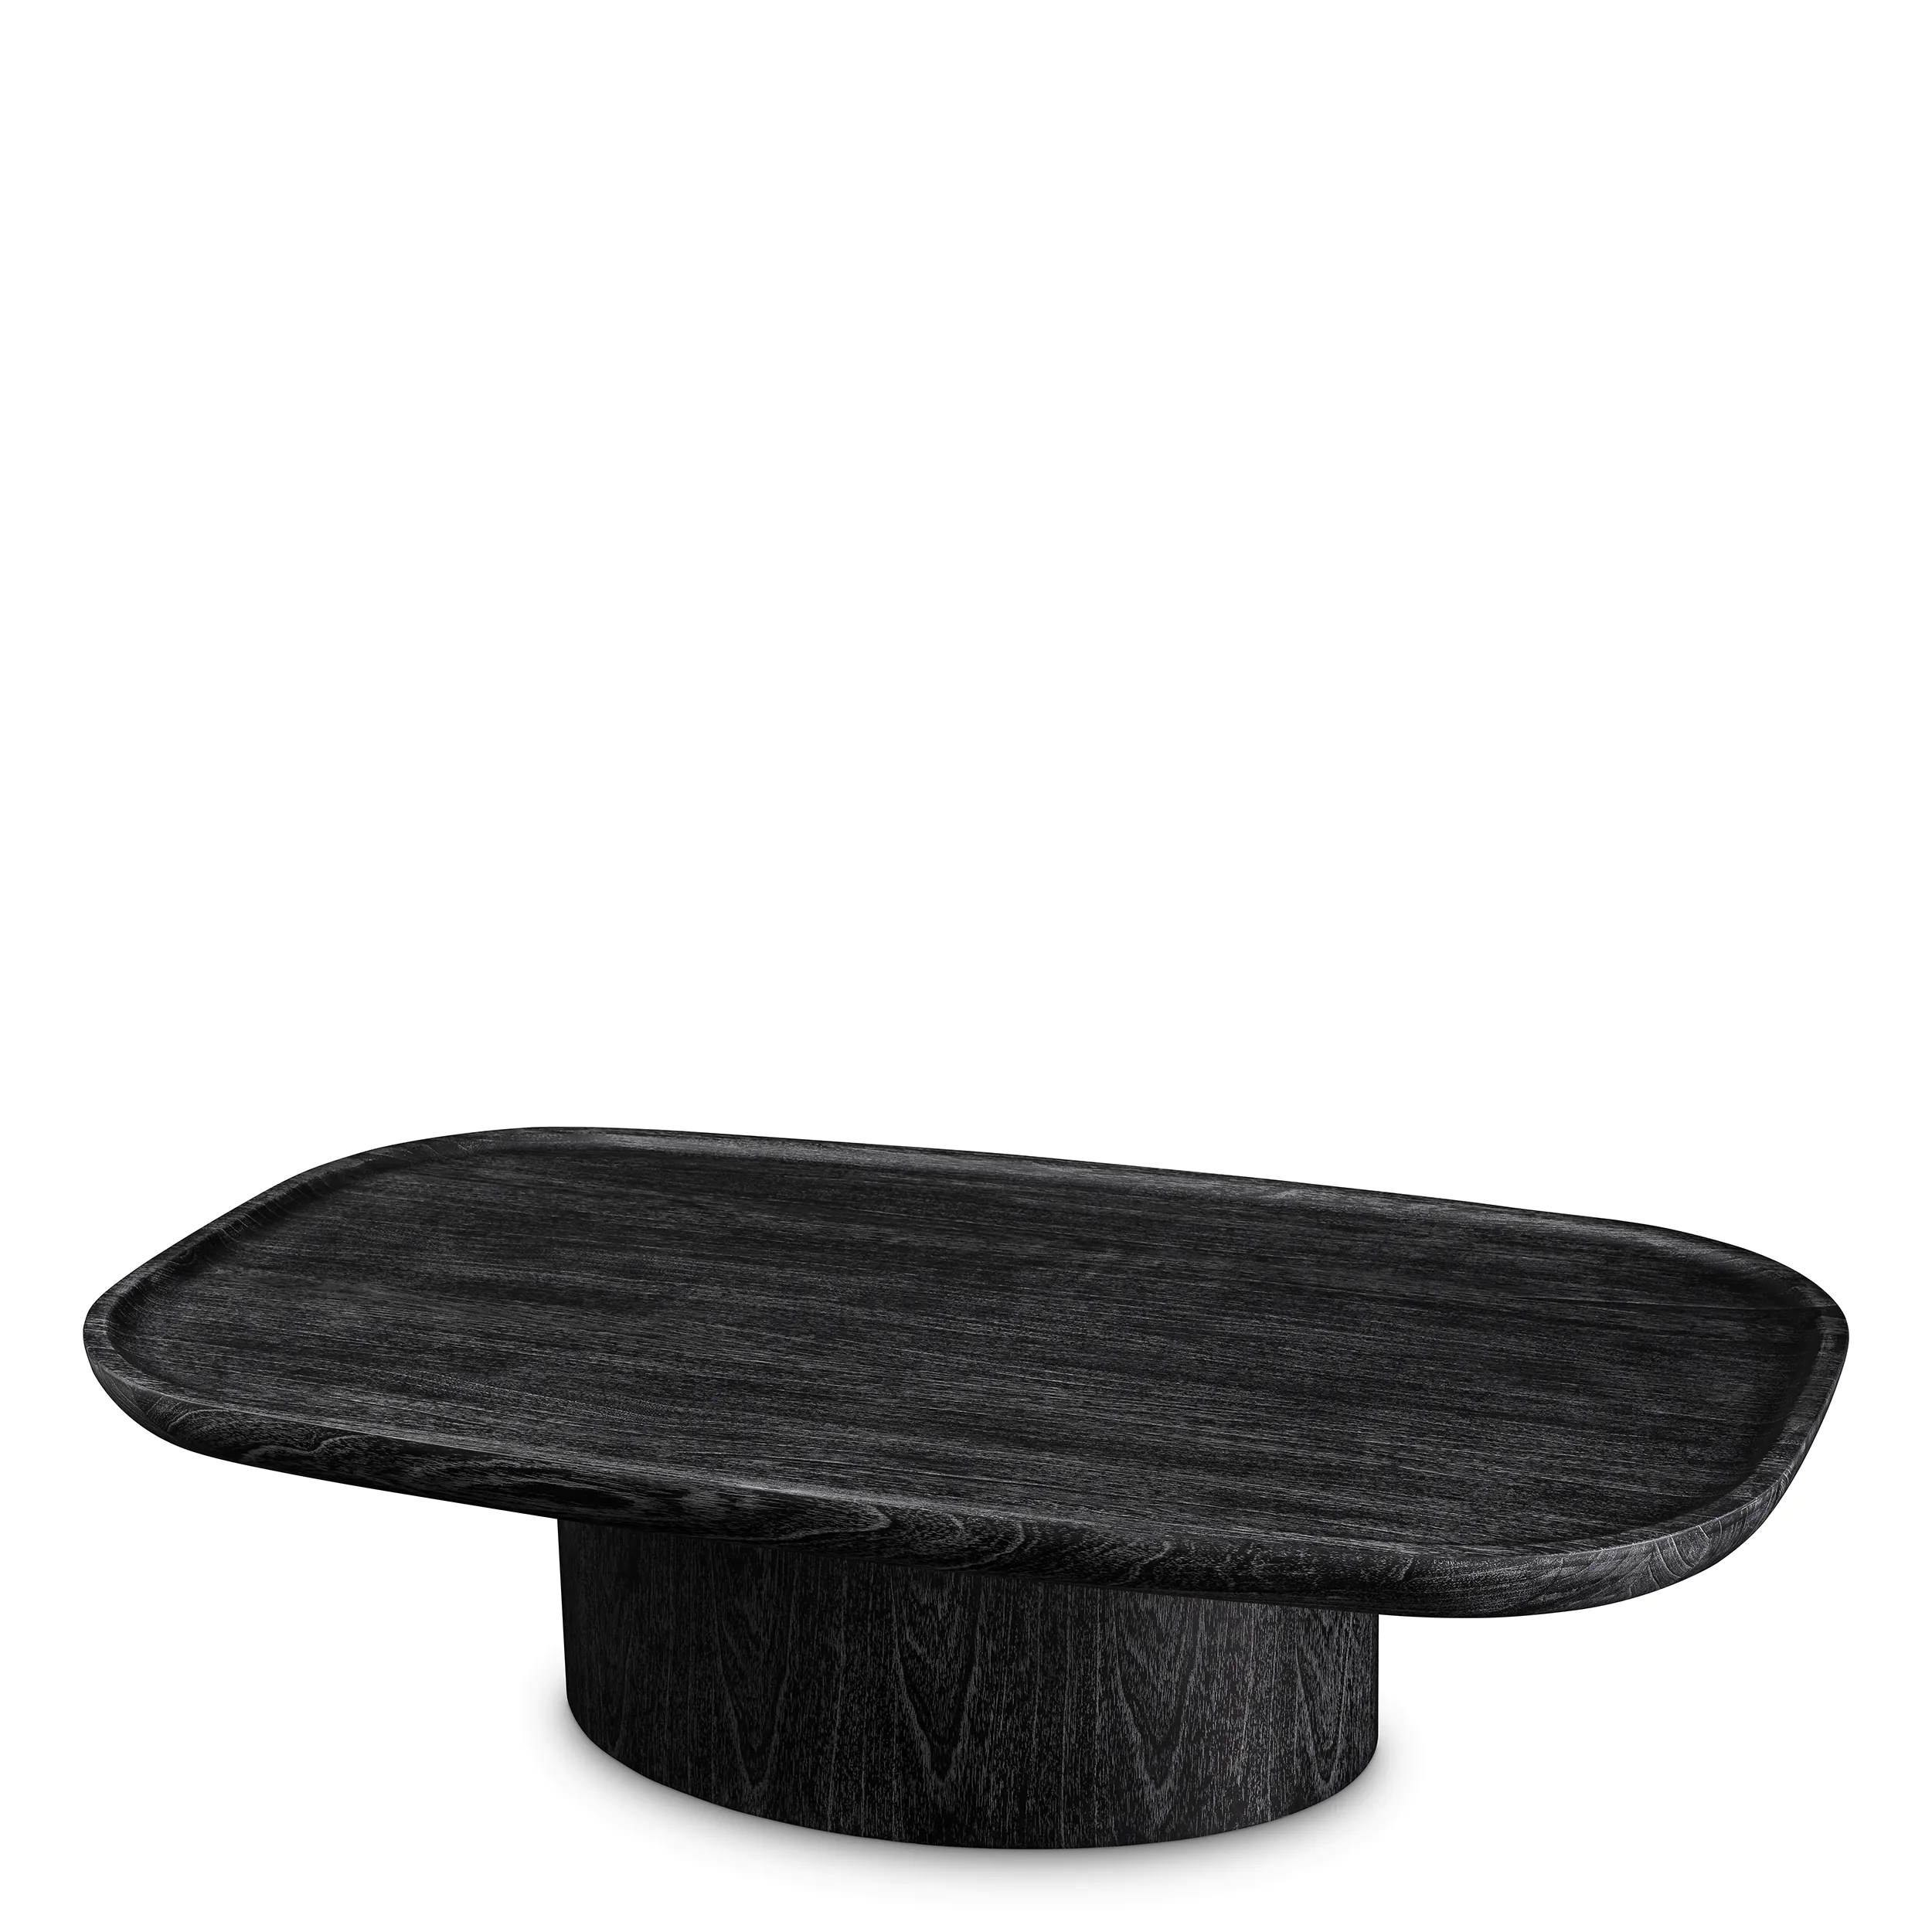 Rouault Coffee Table charcoal grey Eichholtz-114581-21id